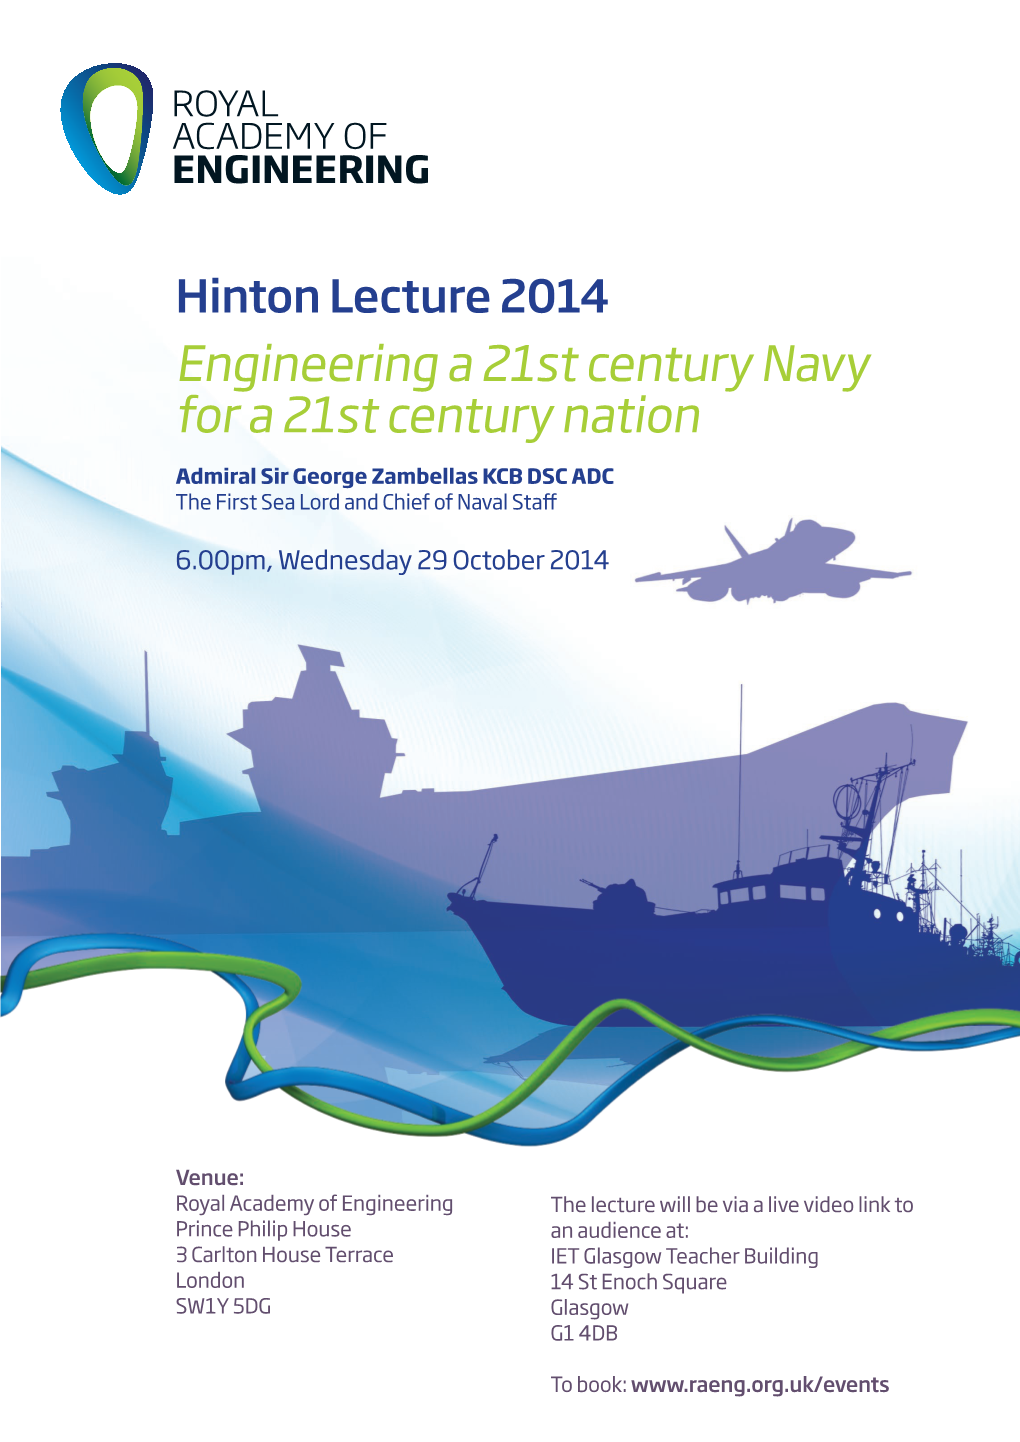 The Hinton Lecture 2014